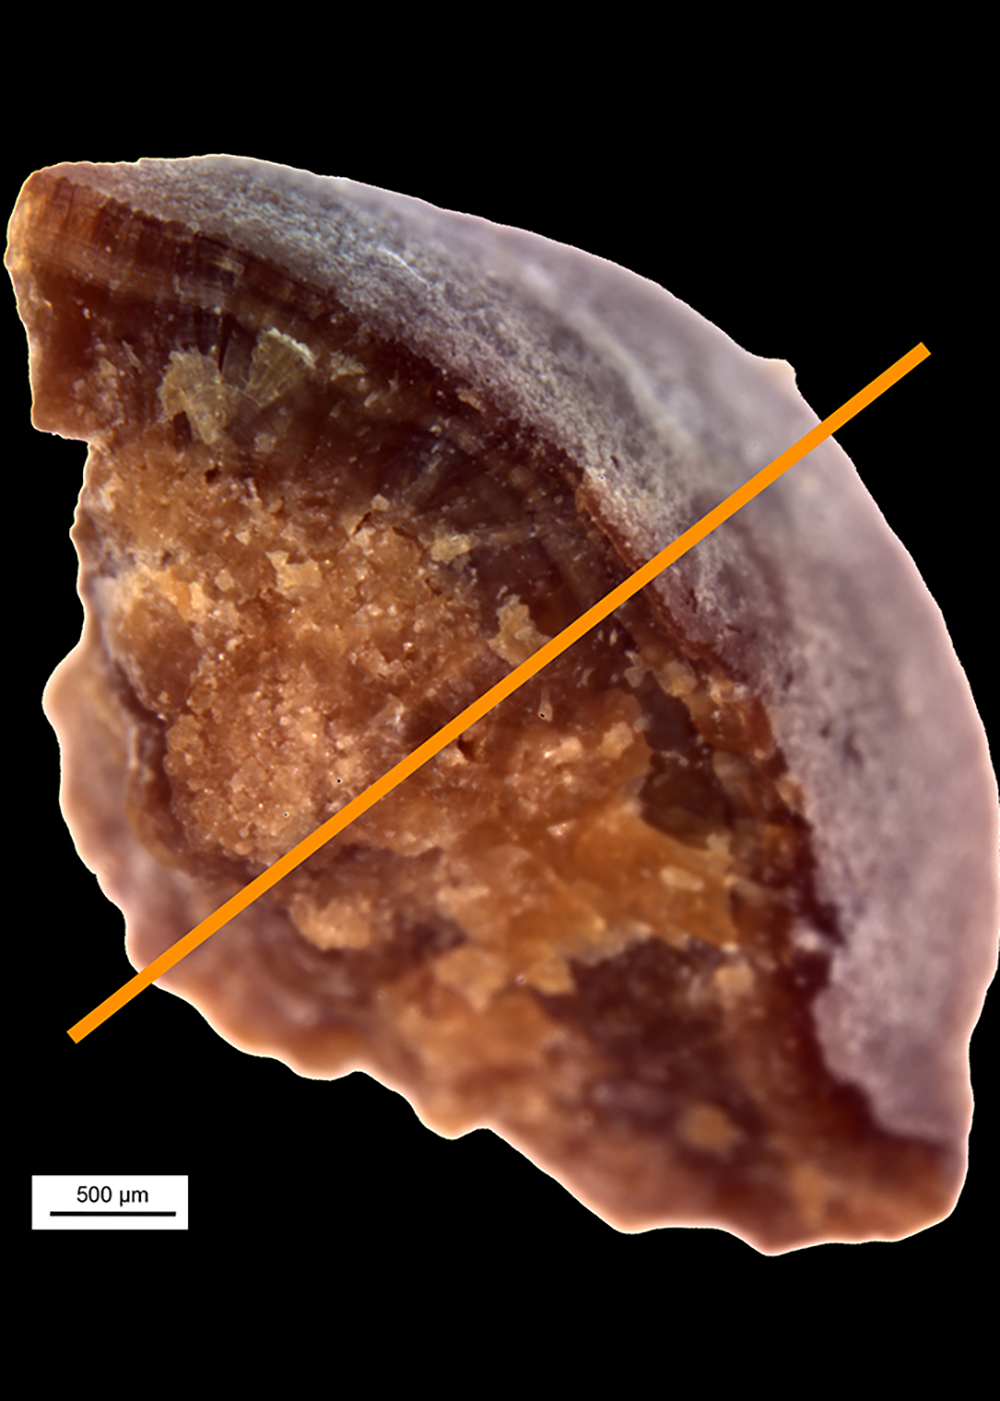 A human kidney stone from the Mayo Clinic. (Image provided by Mayandi Sivaguru, Jessica Saw from Bruce Fouke Lab, Carl R. Woese Institute for Genomic Biology, U of I.)